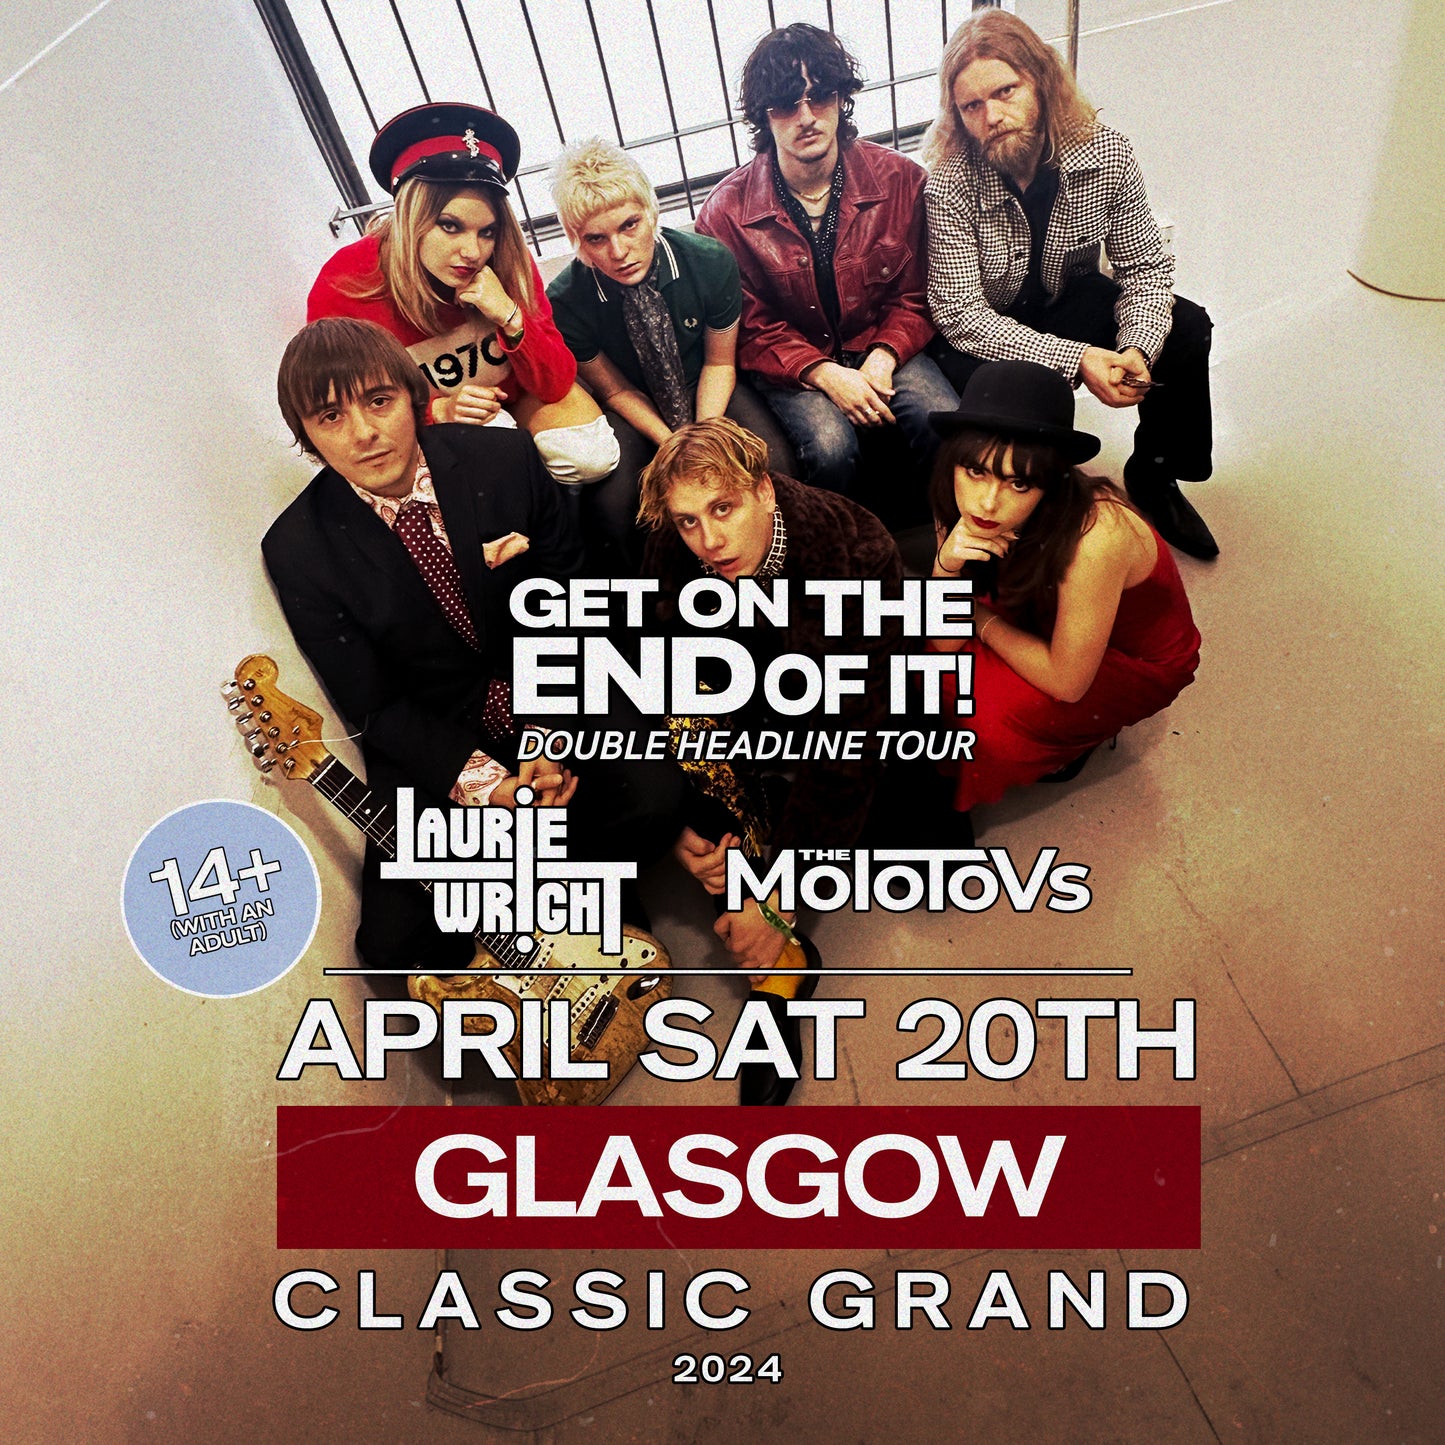 GLASGOW | CLASSIC GRAND | 20.04.24 | Get On The End Of It: Double Headline Tour